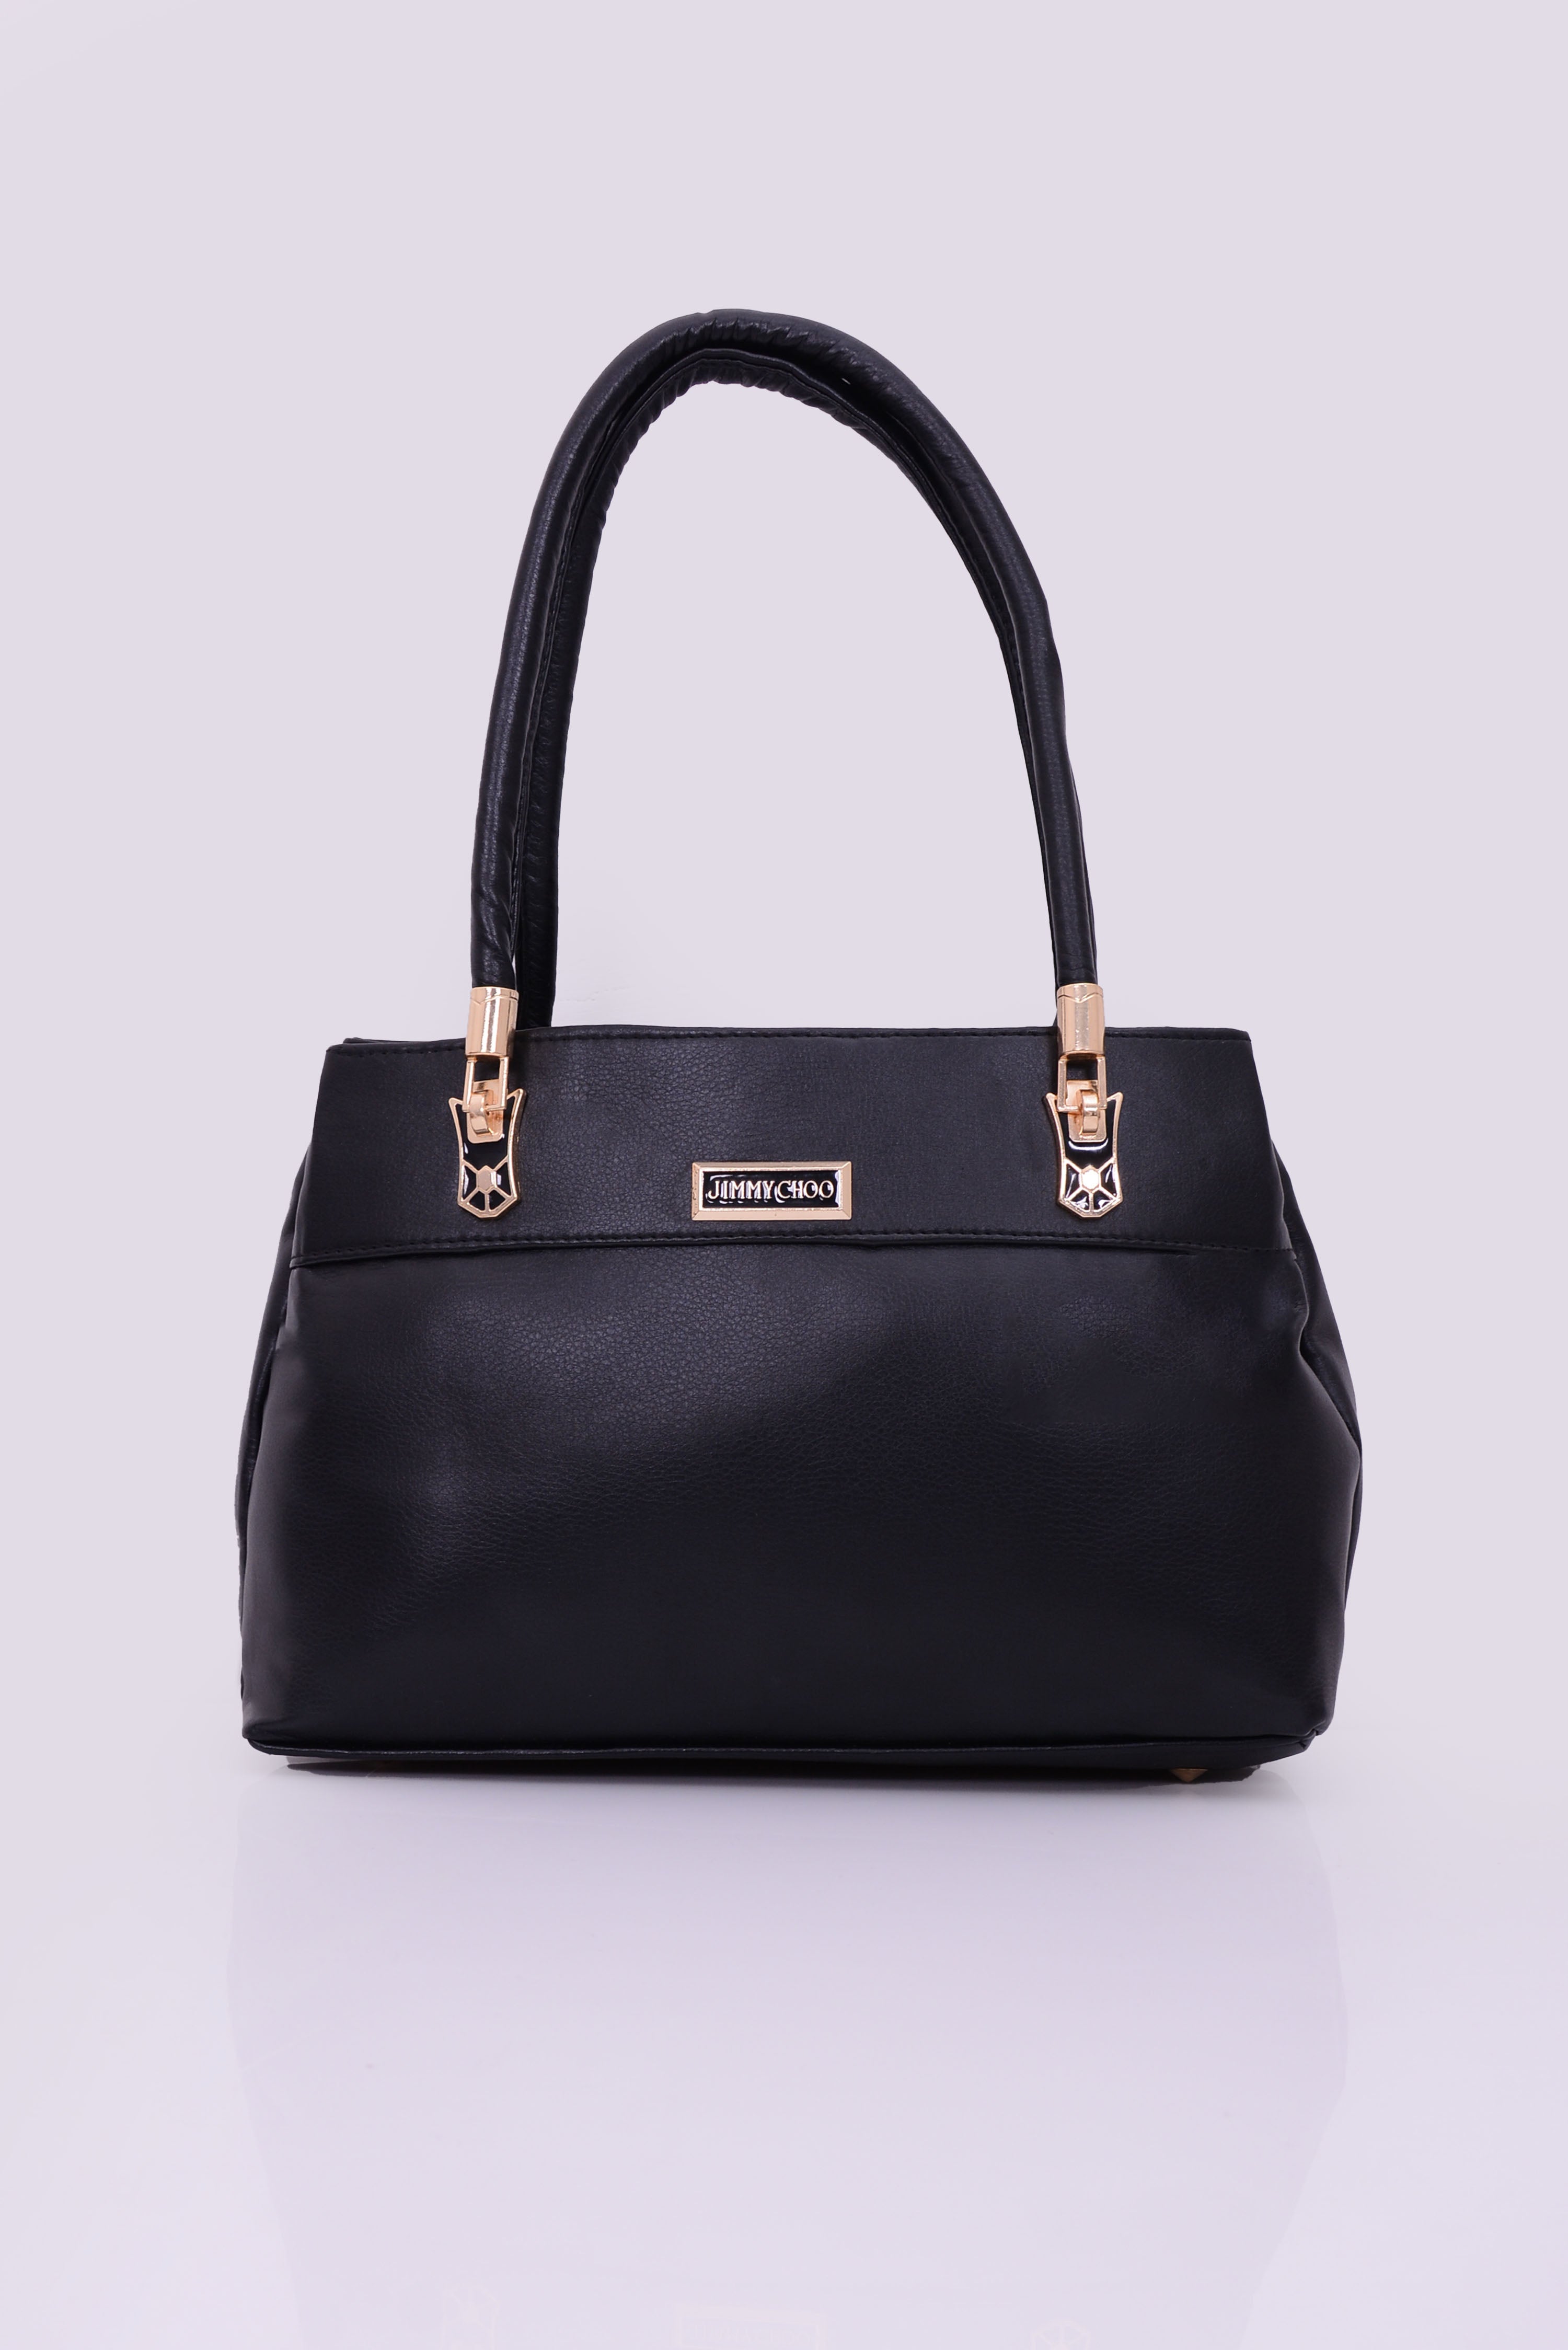 Hand Bags for Women |Ladies Purse A47-11